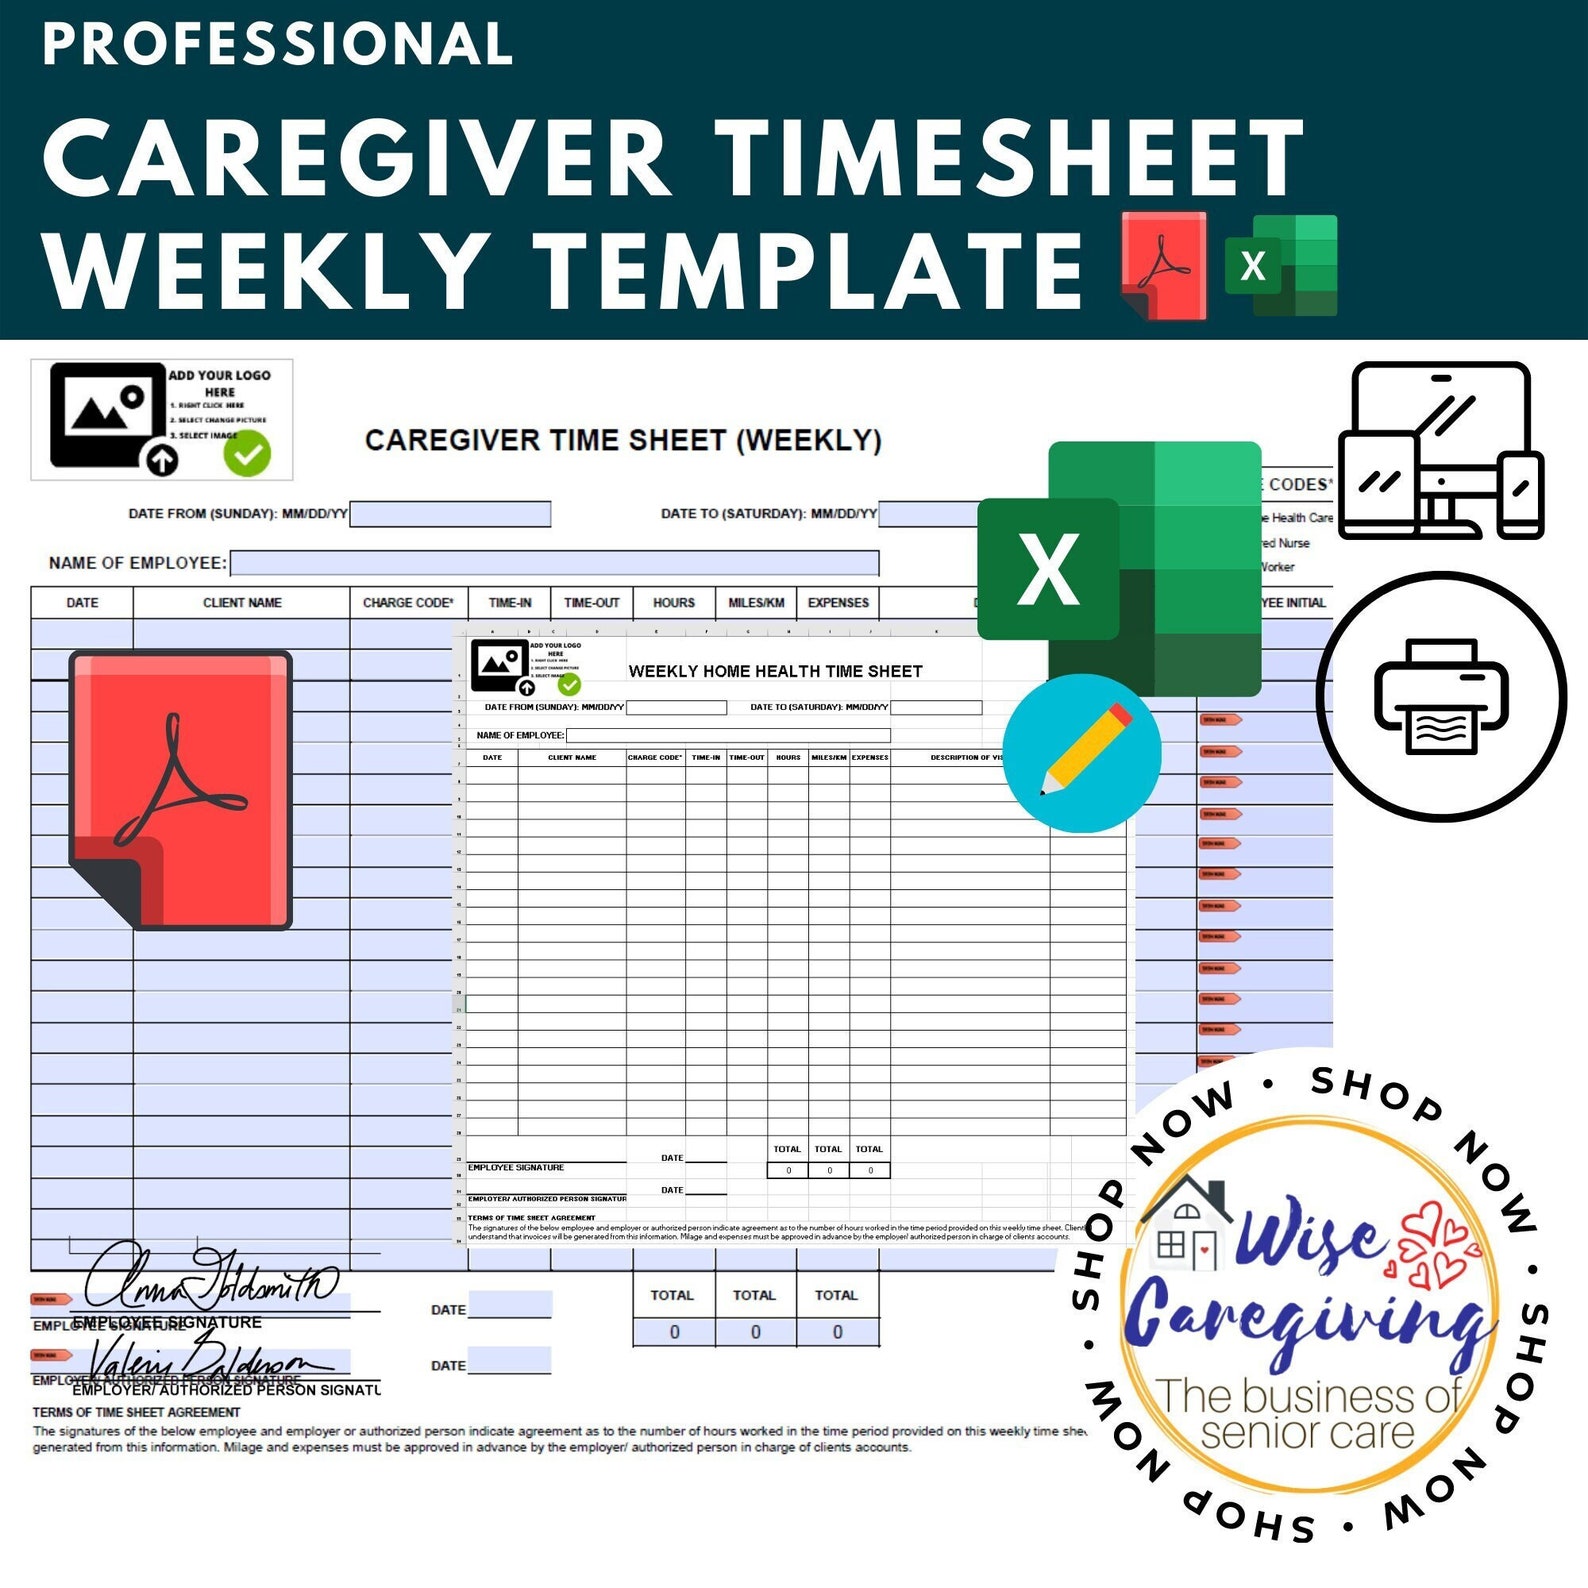 caregiver-time-sheet-weekly-tracker-home-health-care-forms-etsy